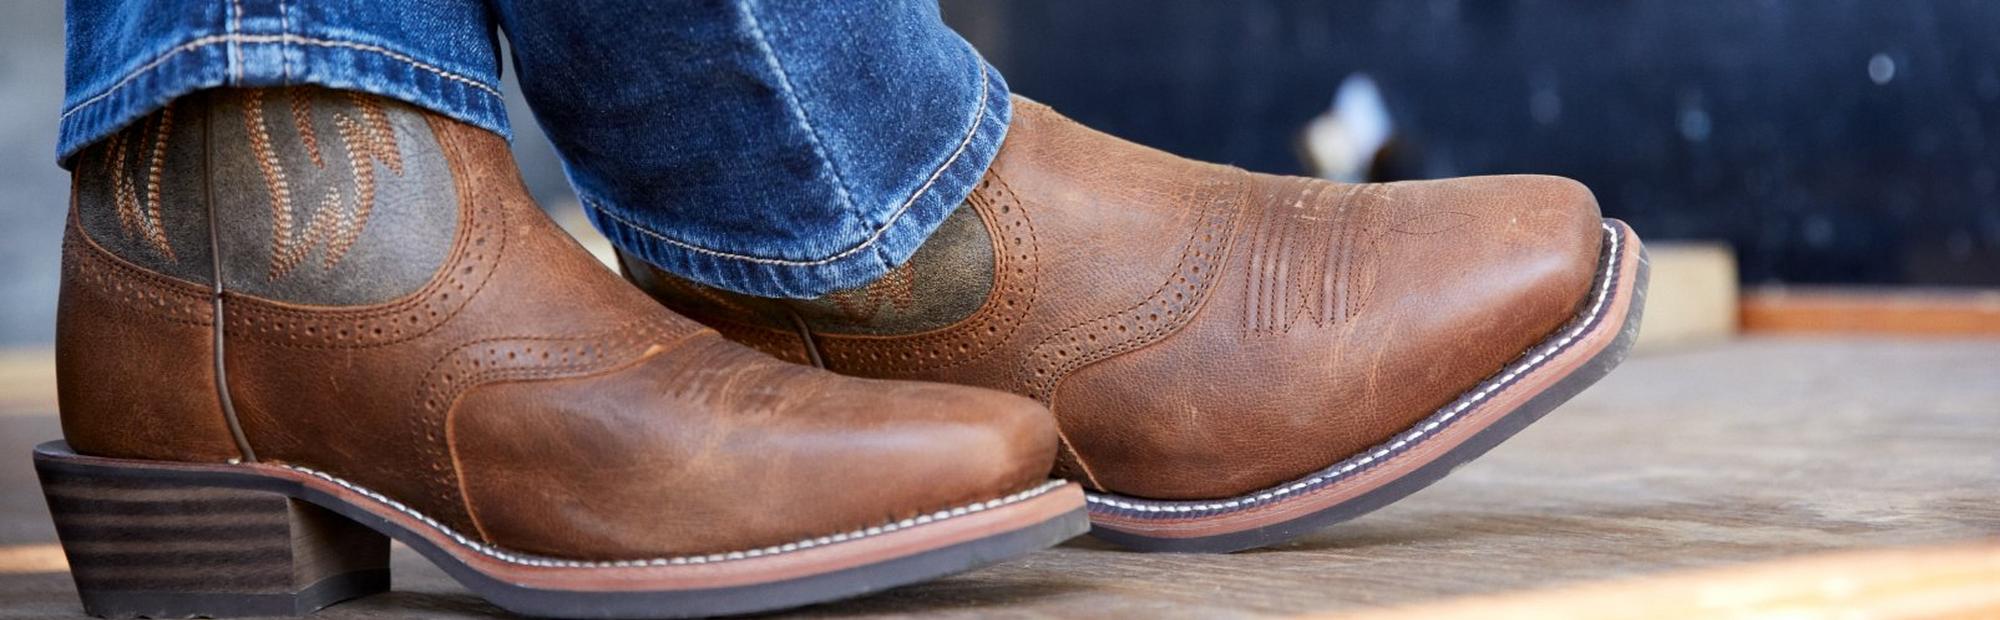 How To Clean Cowboy Boots Leather